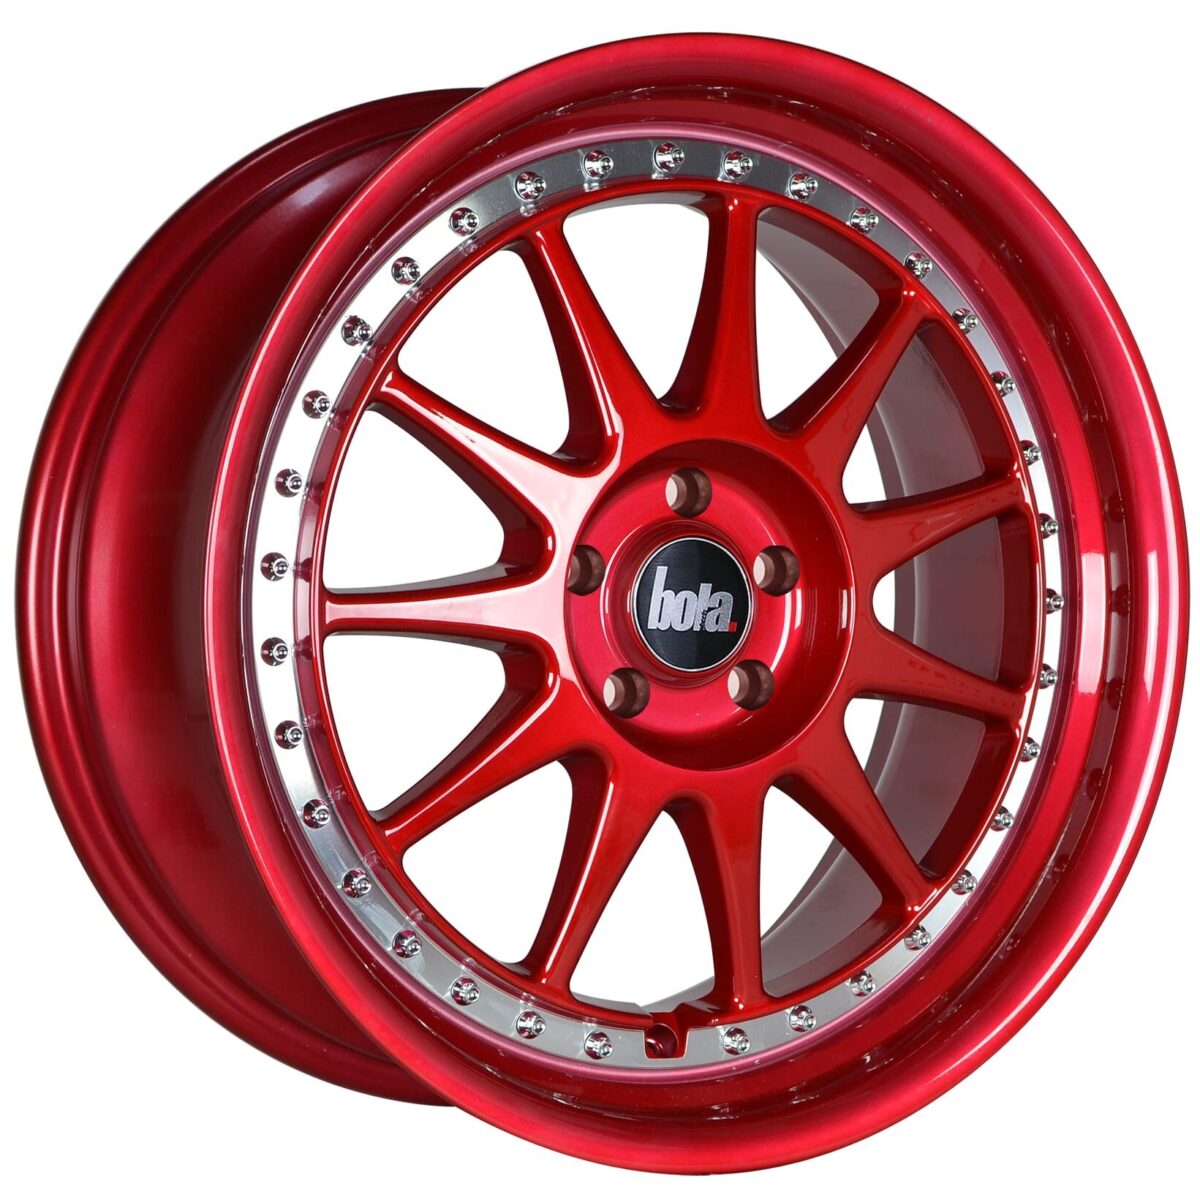 18" BOLA B4 Wheels - Candy Red with Silver Rivets - VW / Audi / Mercedes - 5x112